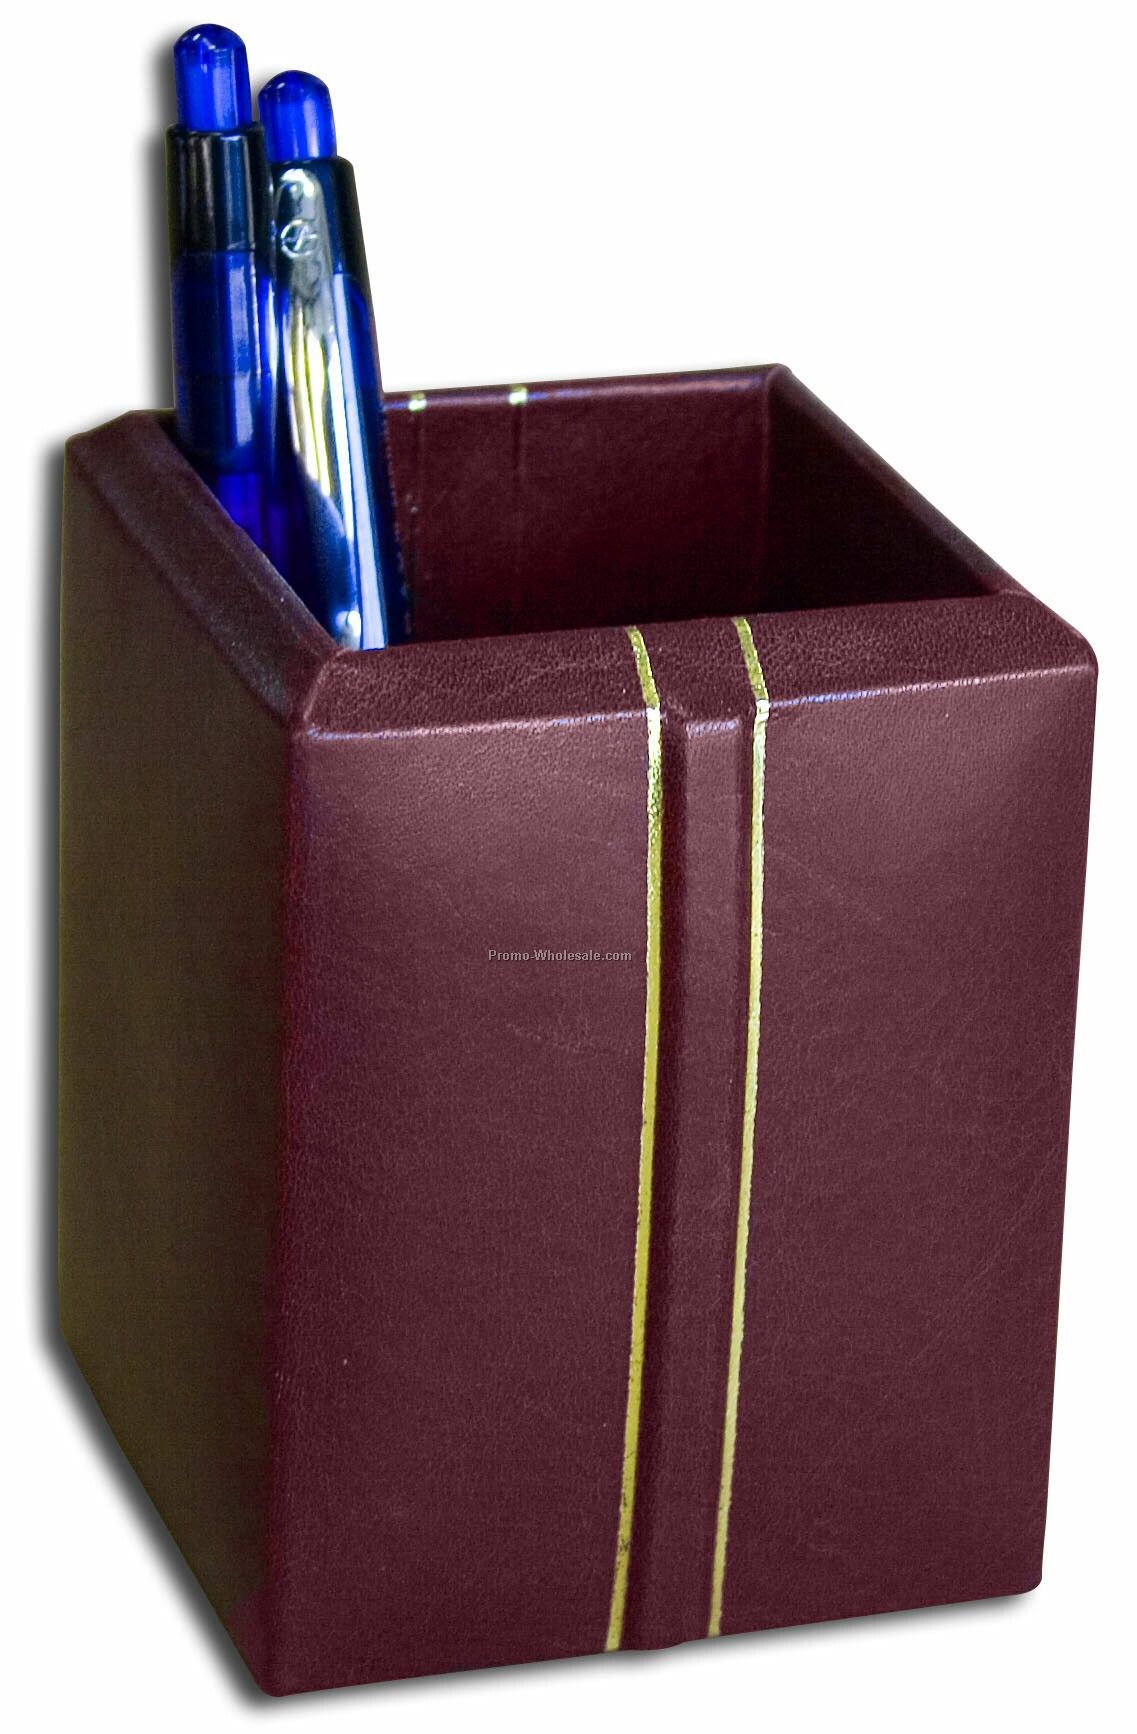 Leather Pencil Cup - Burgundy Red 4"x6"